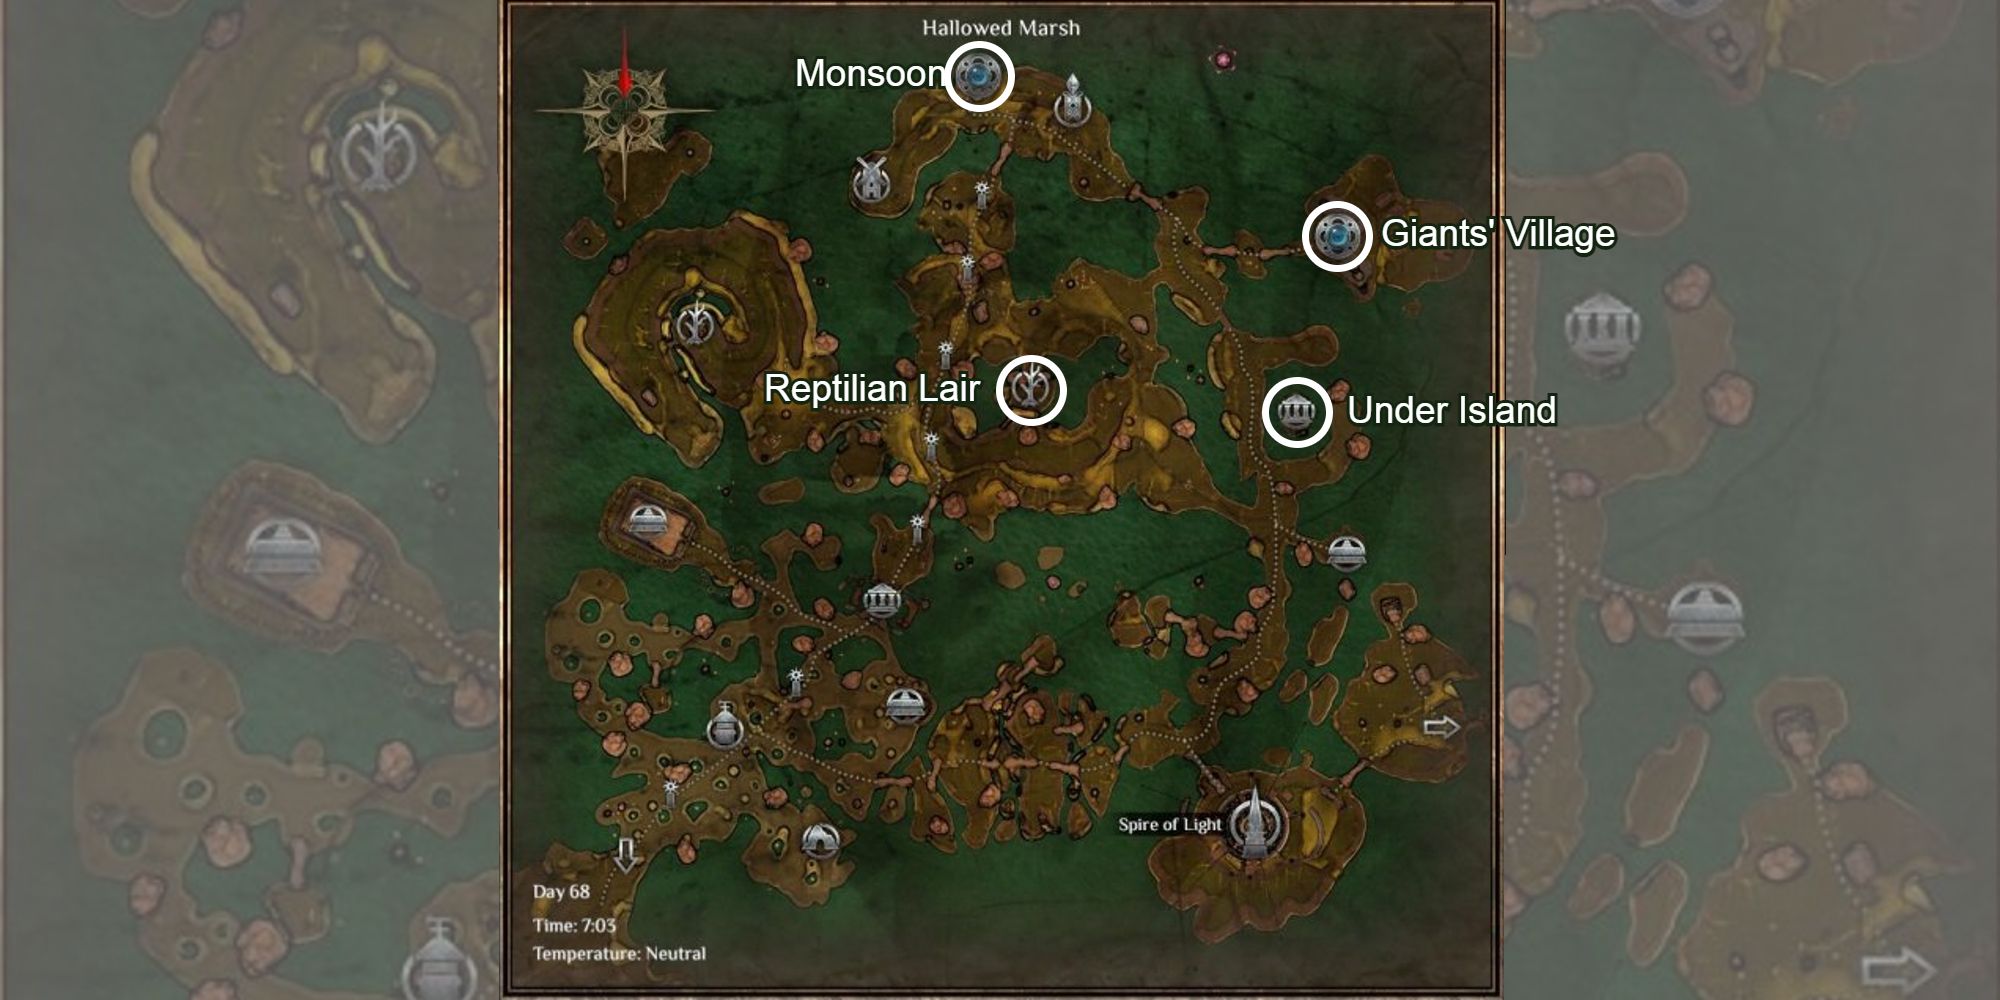 hallowed marsh map with ash giants locations marked